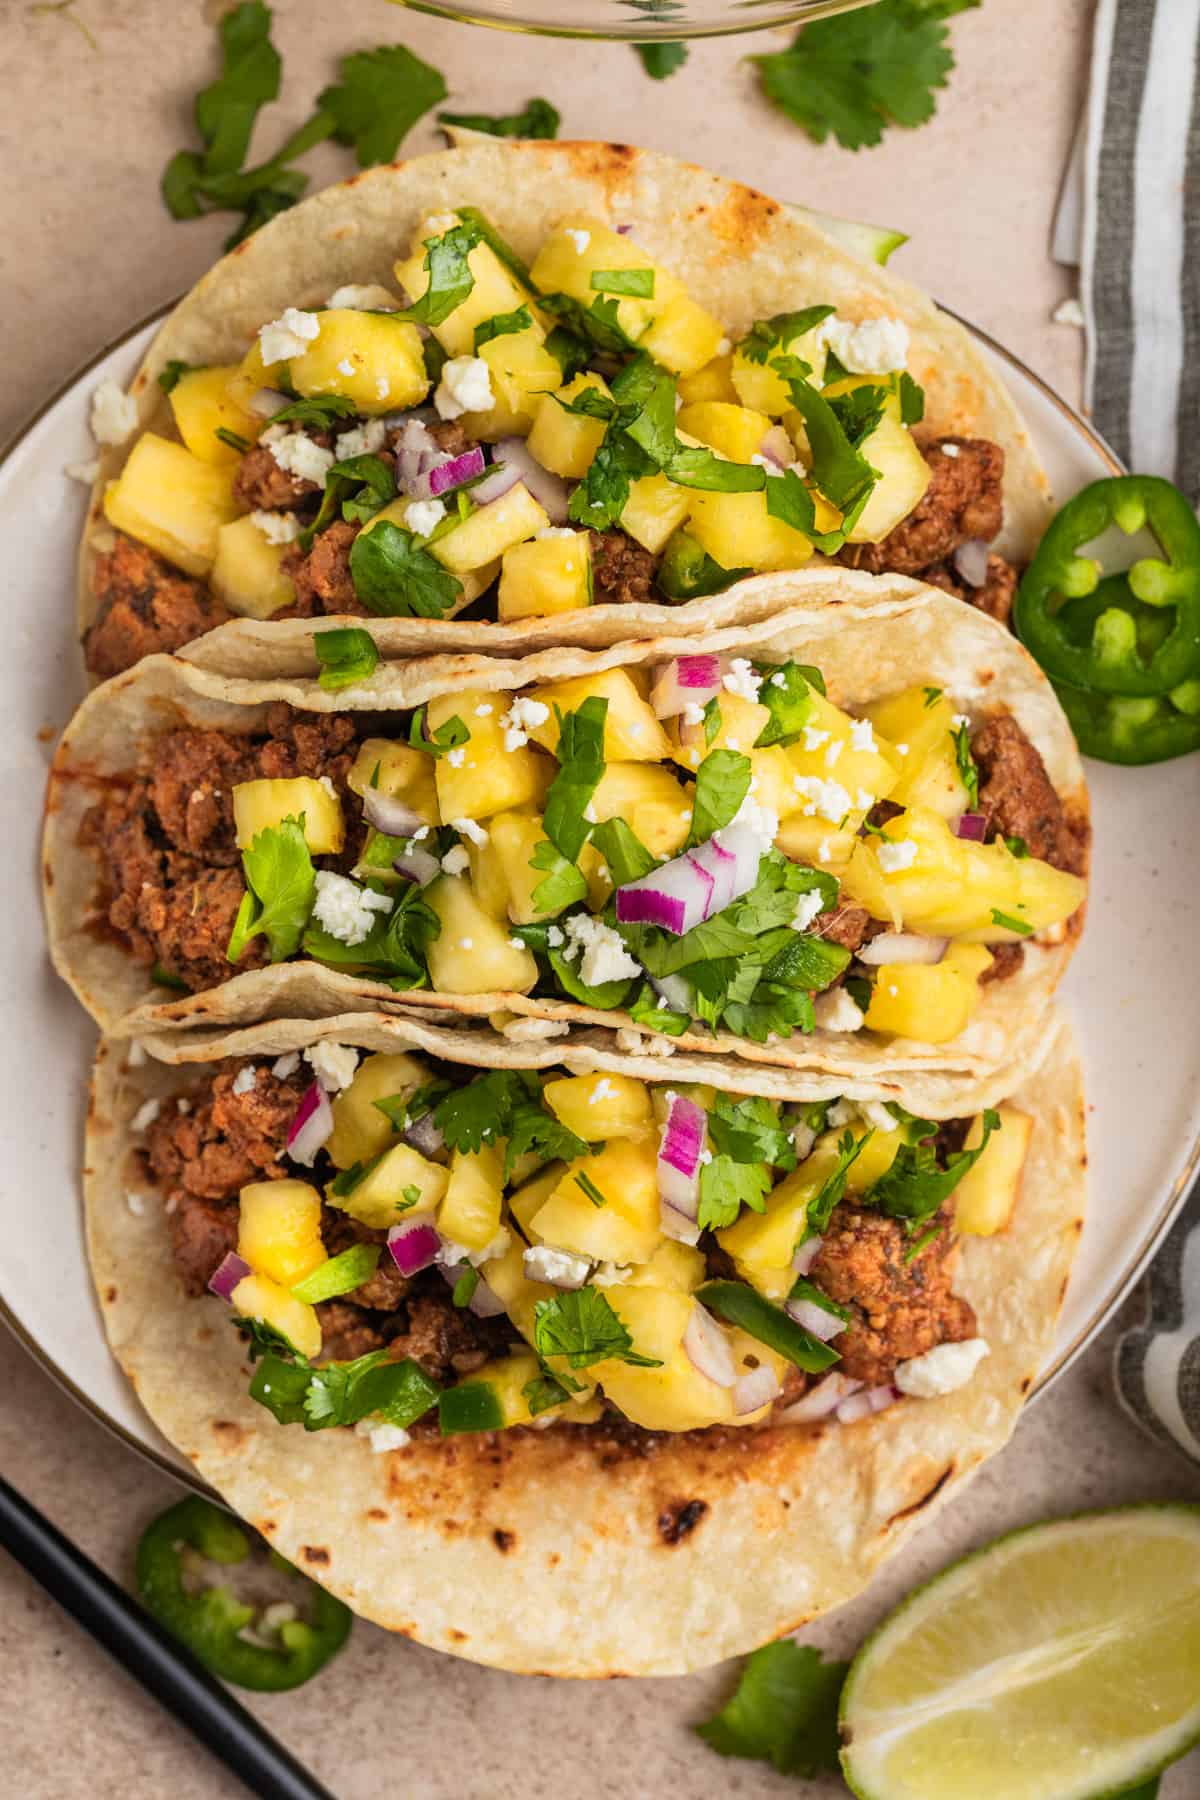 Overhead view of ground pork tacos topped with pineapple salsa.